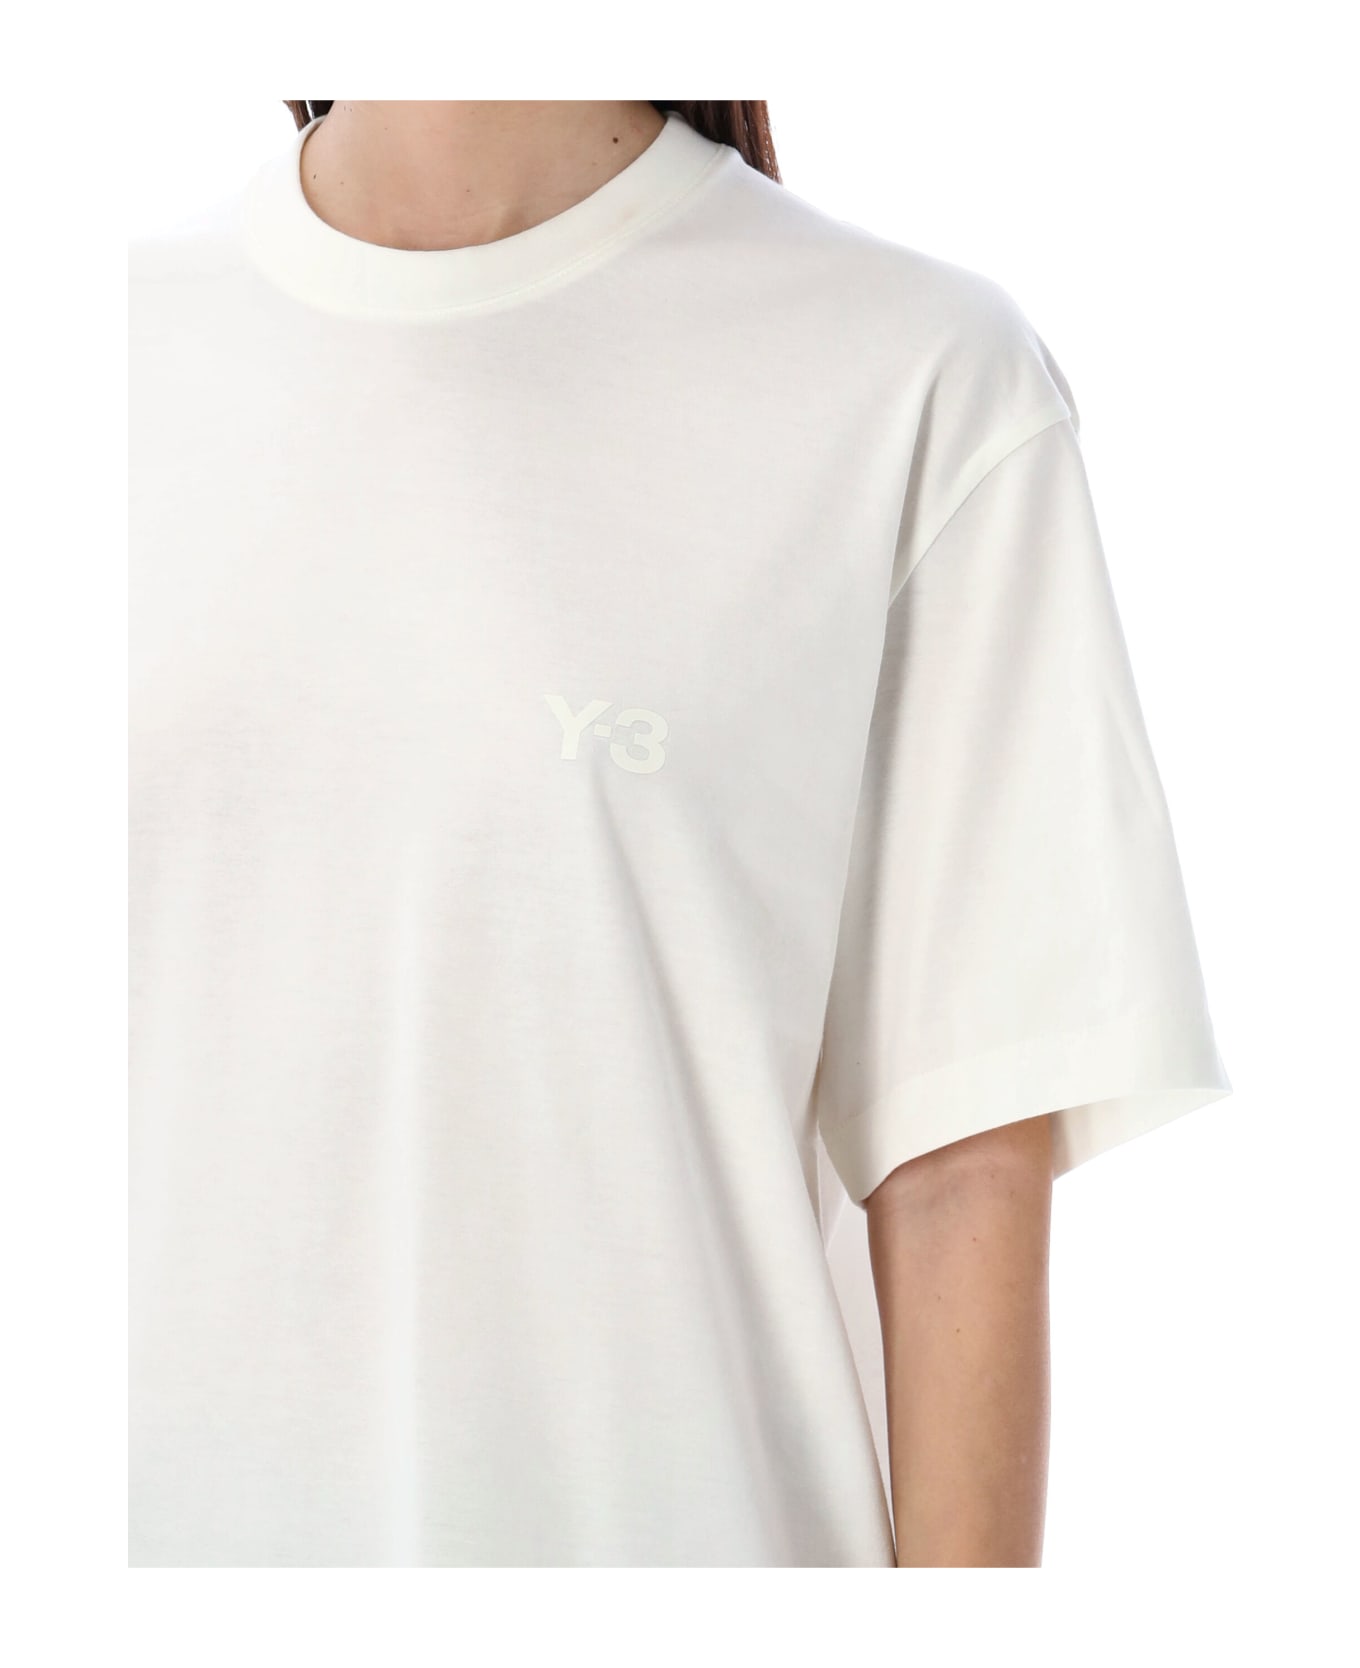 Y-3 Relaxed S/s Tee - WHITE Tシャツ